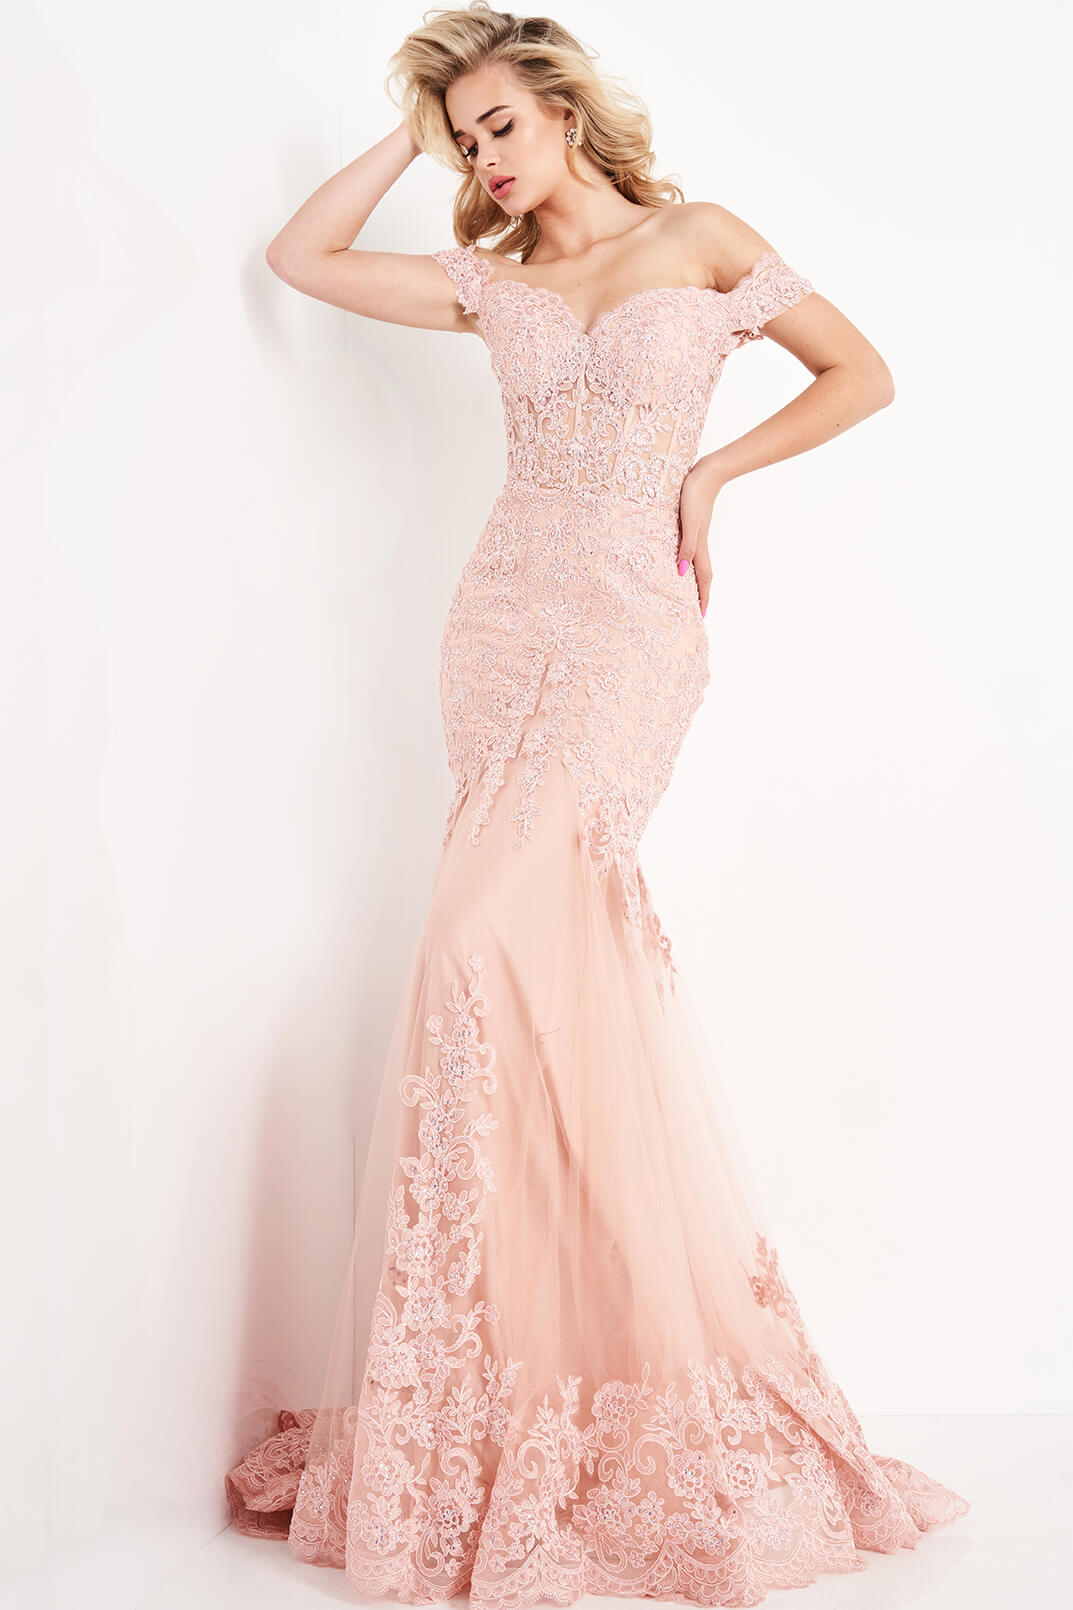 JVN65688A_Blush-prom-dress-front-off-the-shoulder-lace-mermaid